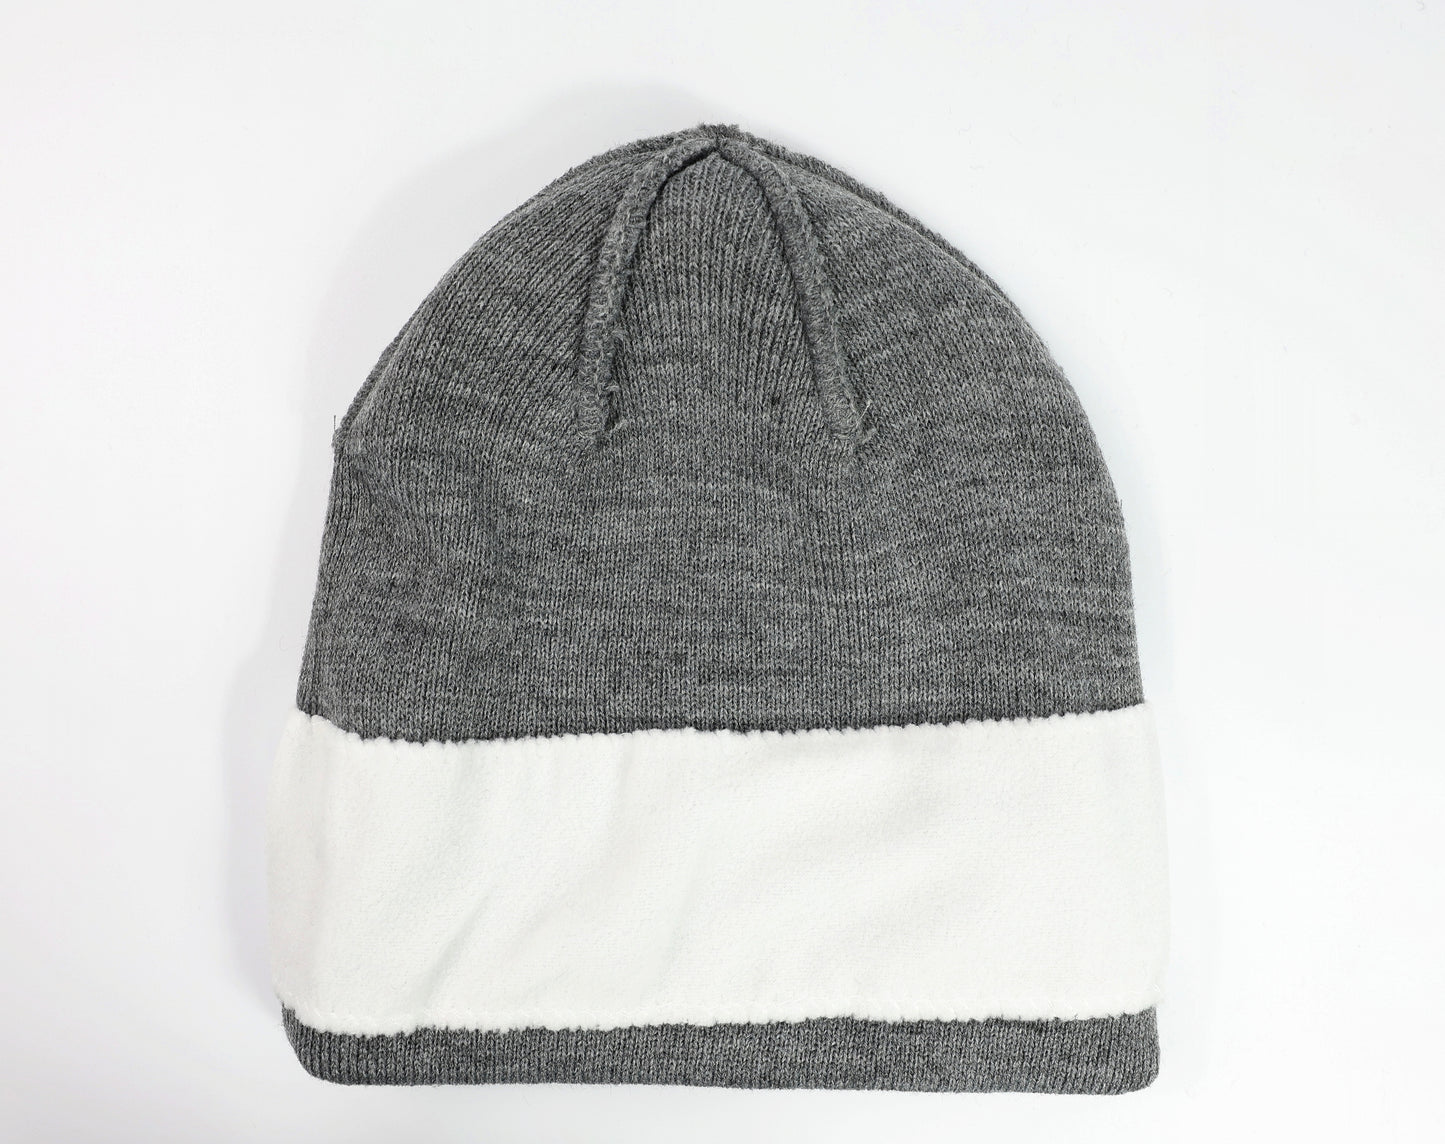 Acrylic 2PLY Knitted Beanie with Microfleece Lining